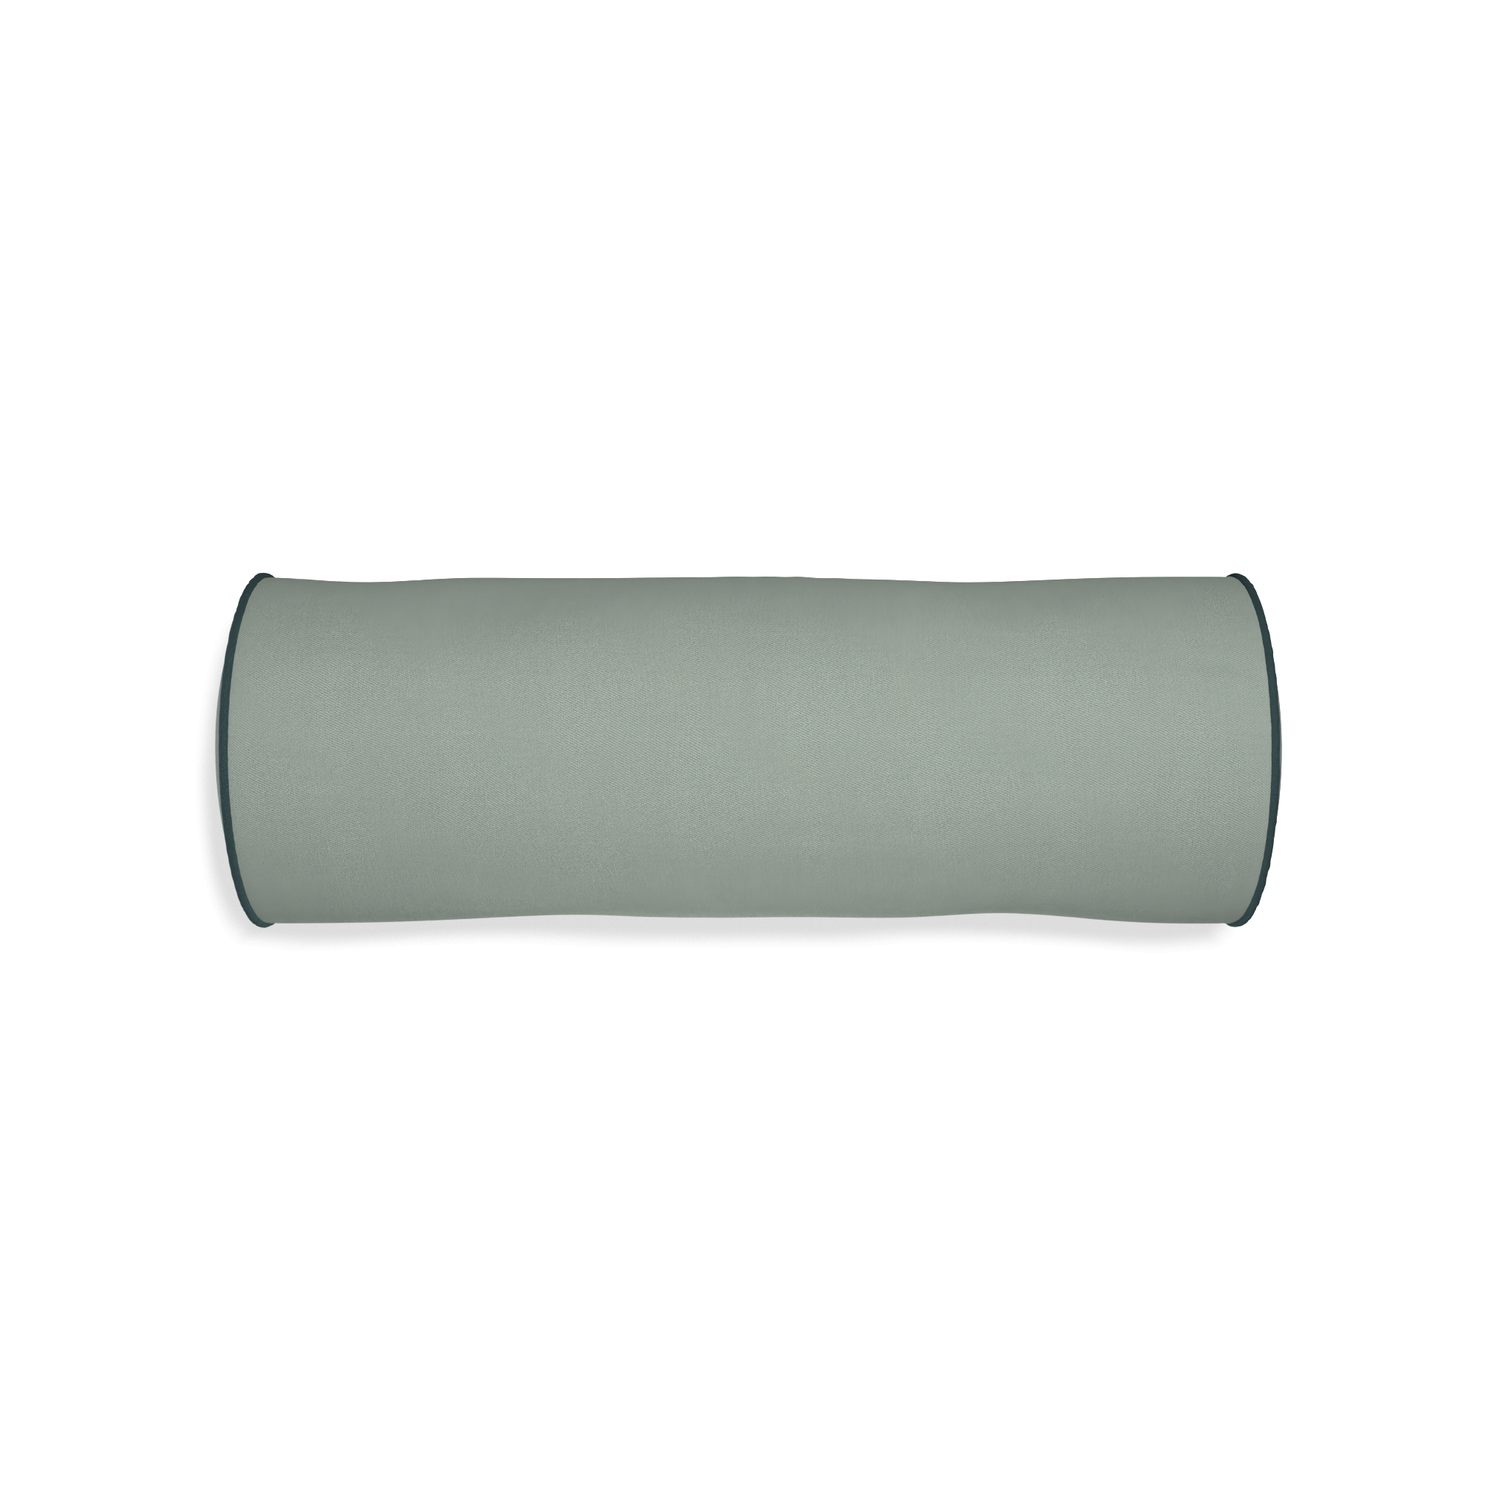 Bolster sage custom sage green cottonpillow with p piping on white background